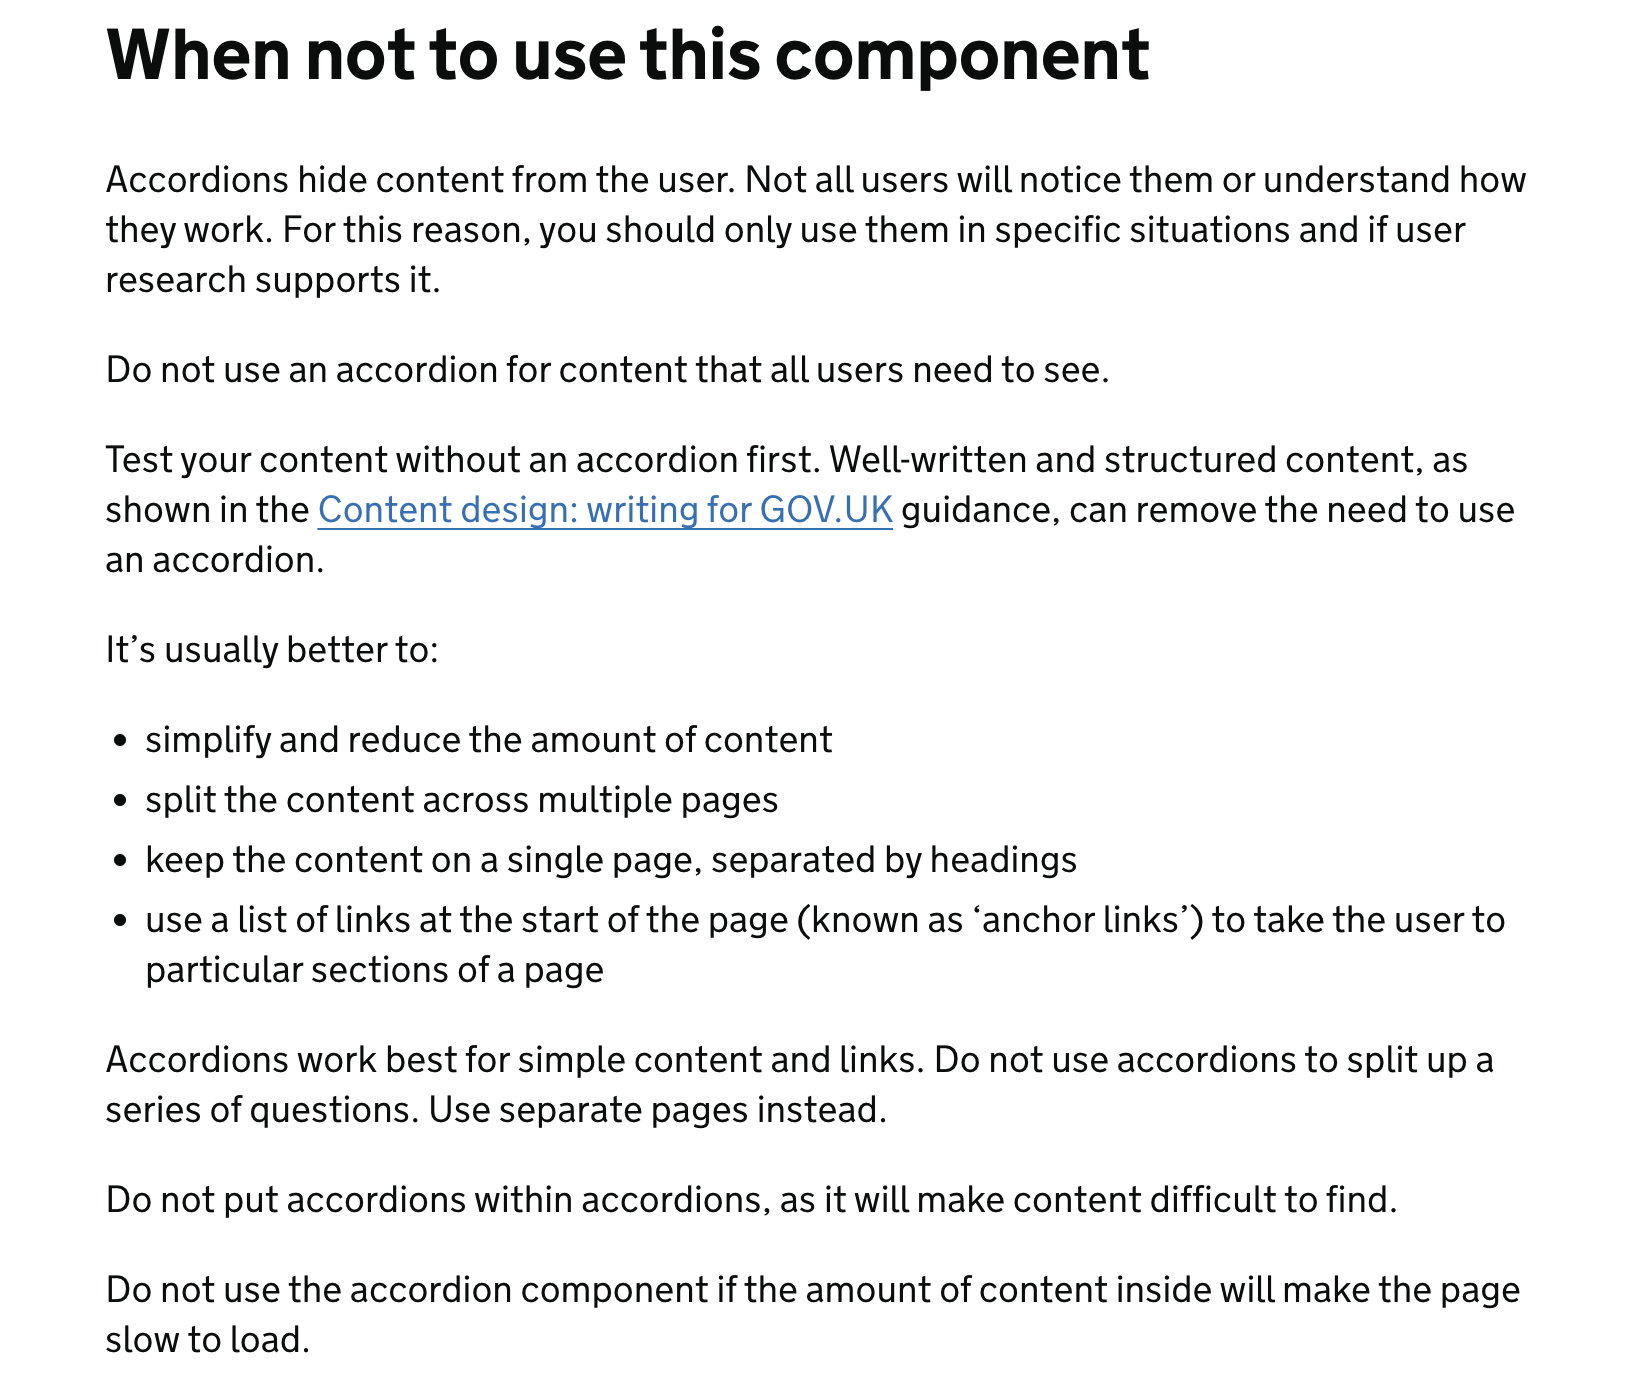 When not to use this component Accordions hide content from the user. Not all users will notice them or understand how they work. For this reason, you should only use them in specific situations and if user research supports it.  Do not use an accordion for content that all users need to see.  Test your content without an accordion first. Well-written and structured content, as shown in the Content design: writing for GOV.UK guidance, can remove the need to use an accordion.  It’s usually better to:  simplify and reduce the amount of content split the content across multiple pages keep the content on a single page, separated by headings use a list of links at the start of the page (known as ‘anchor links’) to take the user to particular sections of a page Accordions work best for simple content and links. Do not use accordions to split up a series of questions. Use separate pages instead.  Do not put accordions within accordions, as it will make content difficult to find.